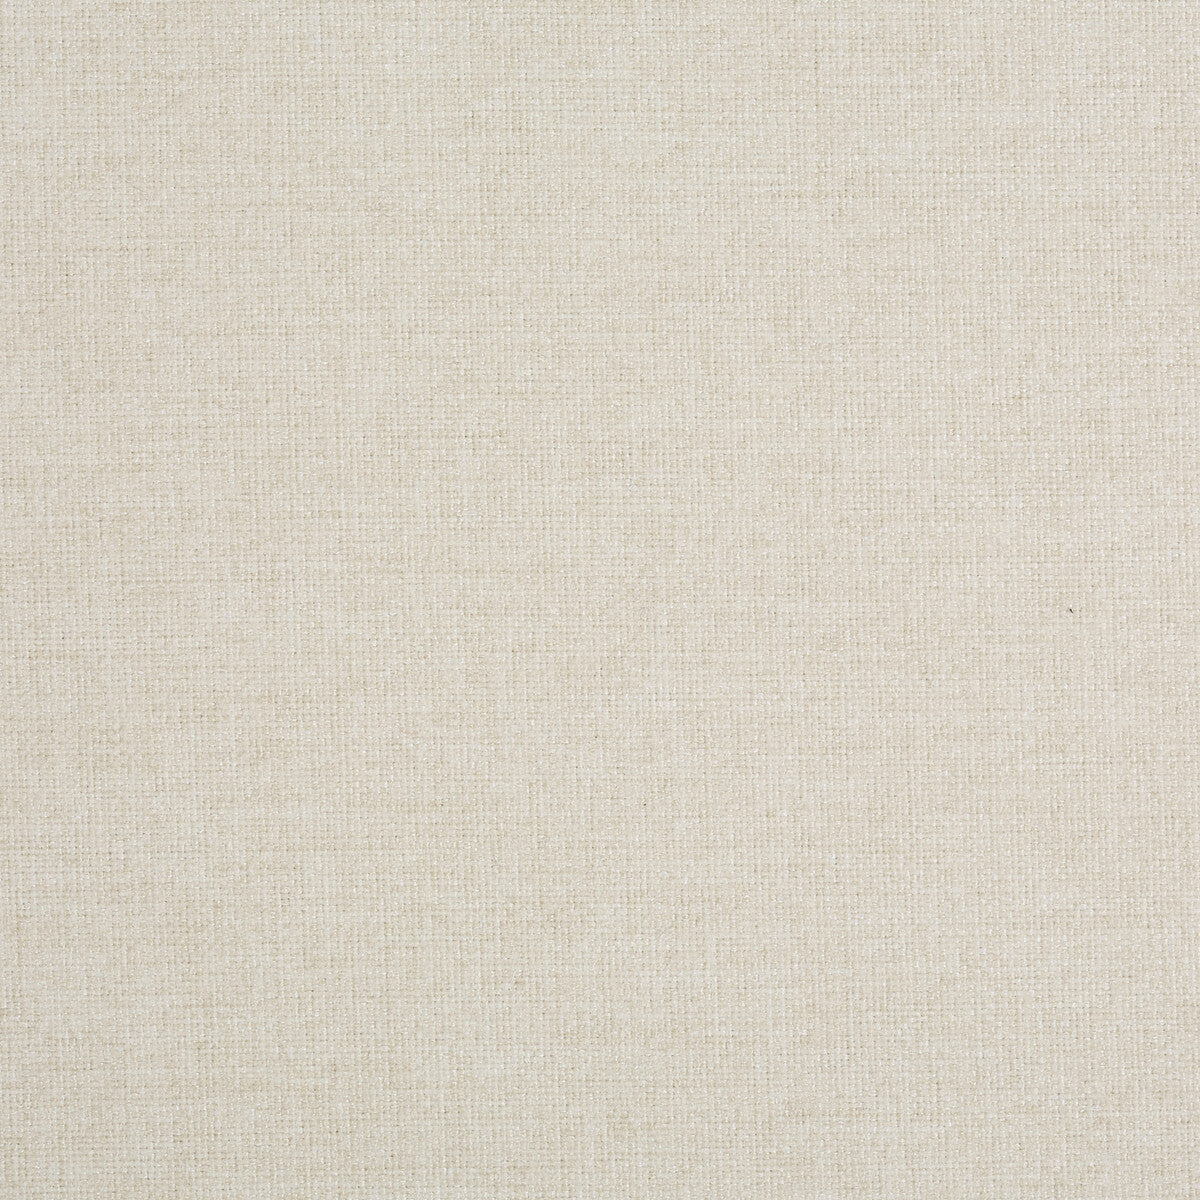 Kravet Smart fabric in 35121-1 color - pattern 35121.1.0 - by Kravet Smart in the Performance Crypton Home collection